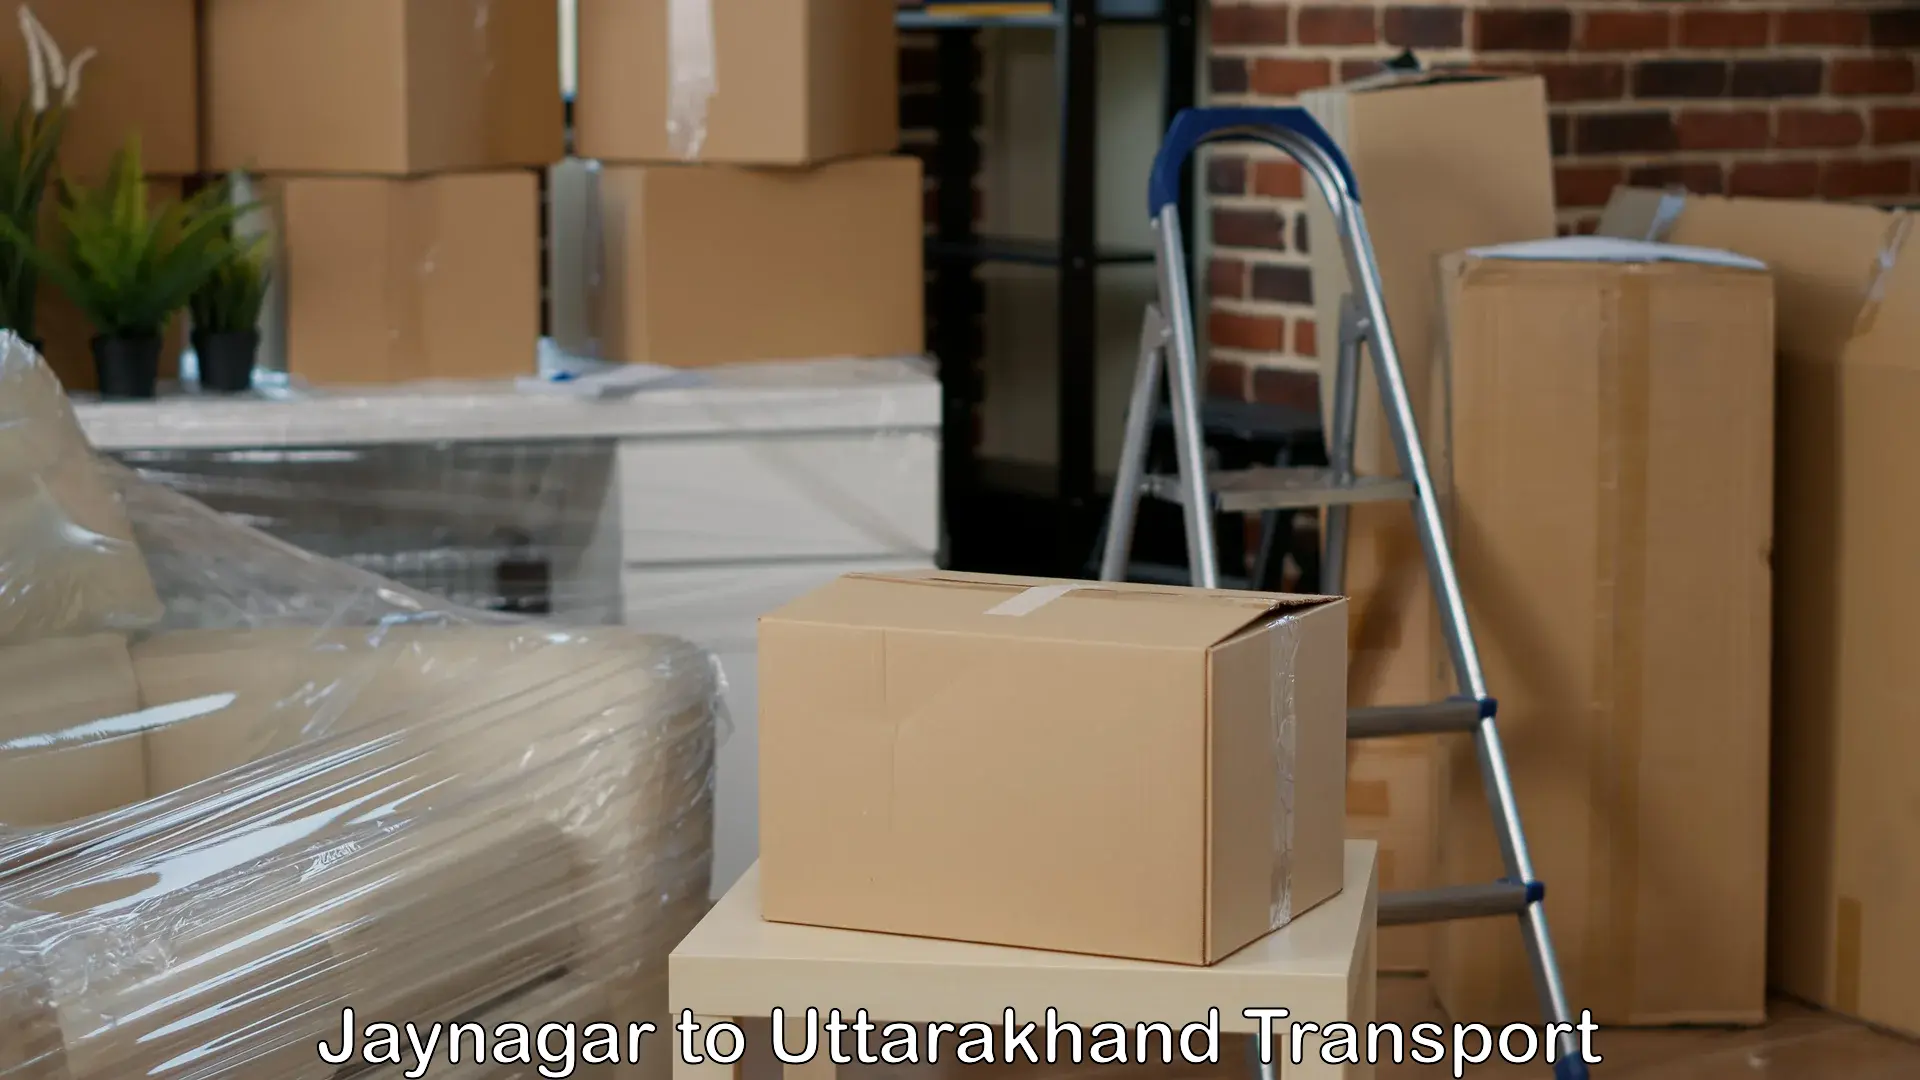 Air freight transport services in Jaynagar to Almora